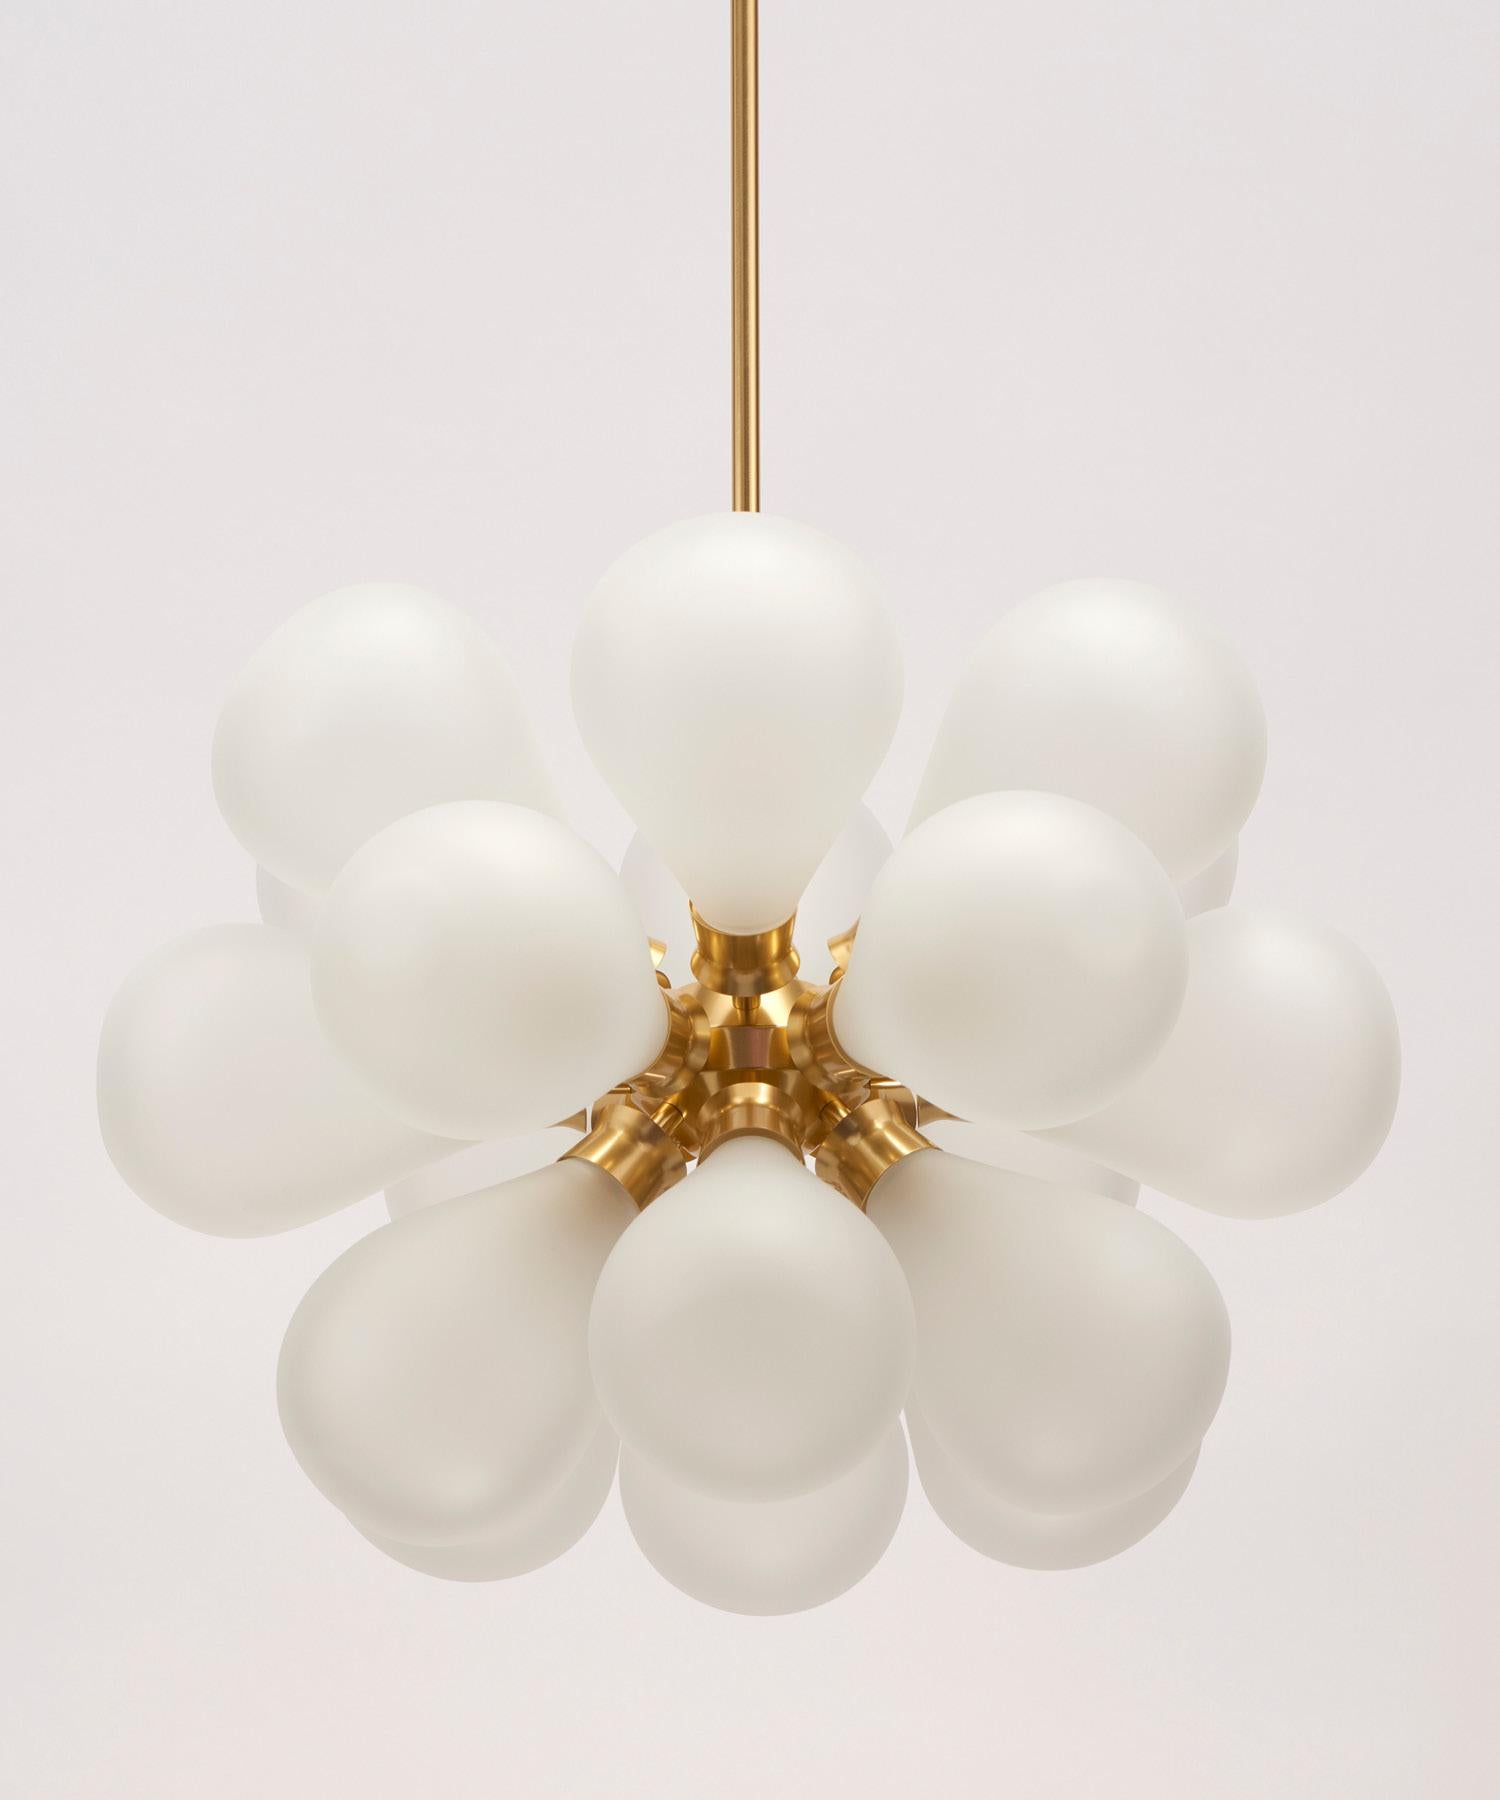 Anodized Cintola Maxi Pendant in Satin Bronze with 18 Handblown Smoke Grey Glass Globes For Sale